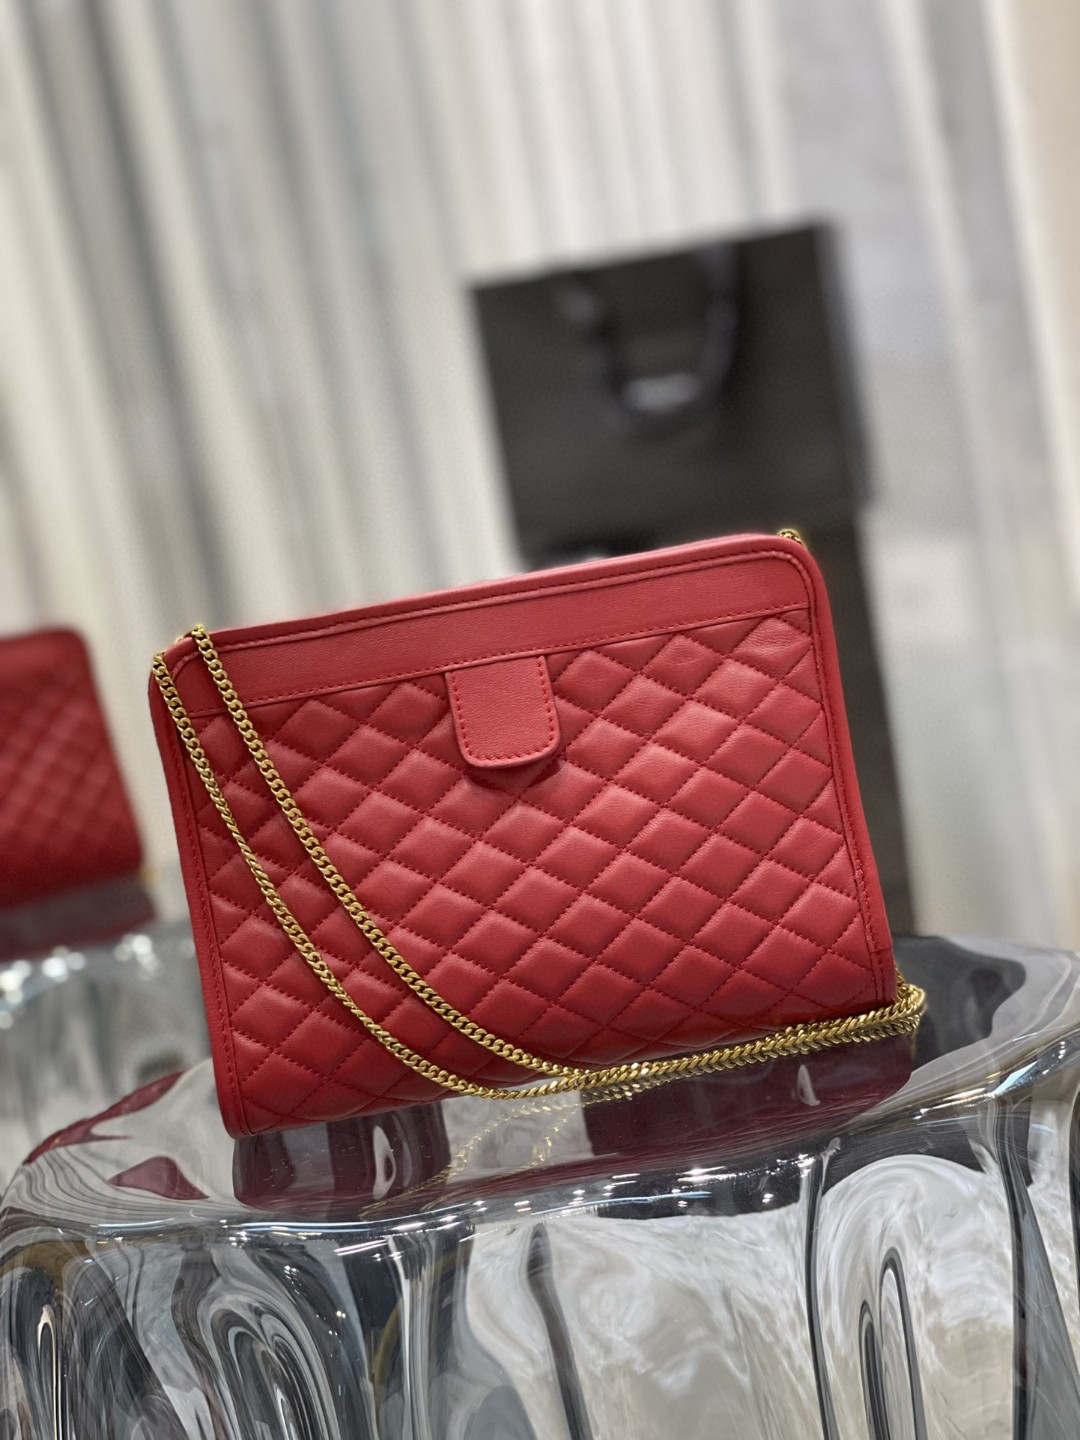 2021 Cheap saint lauren victoire baby clutch in leather red